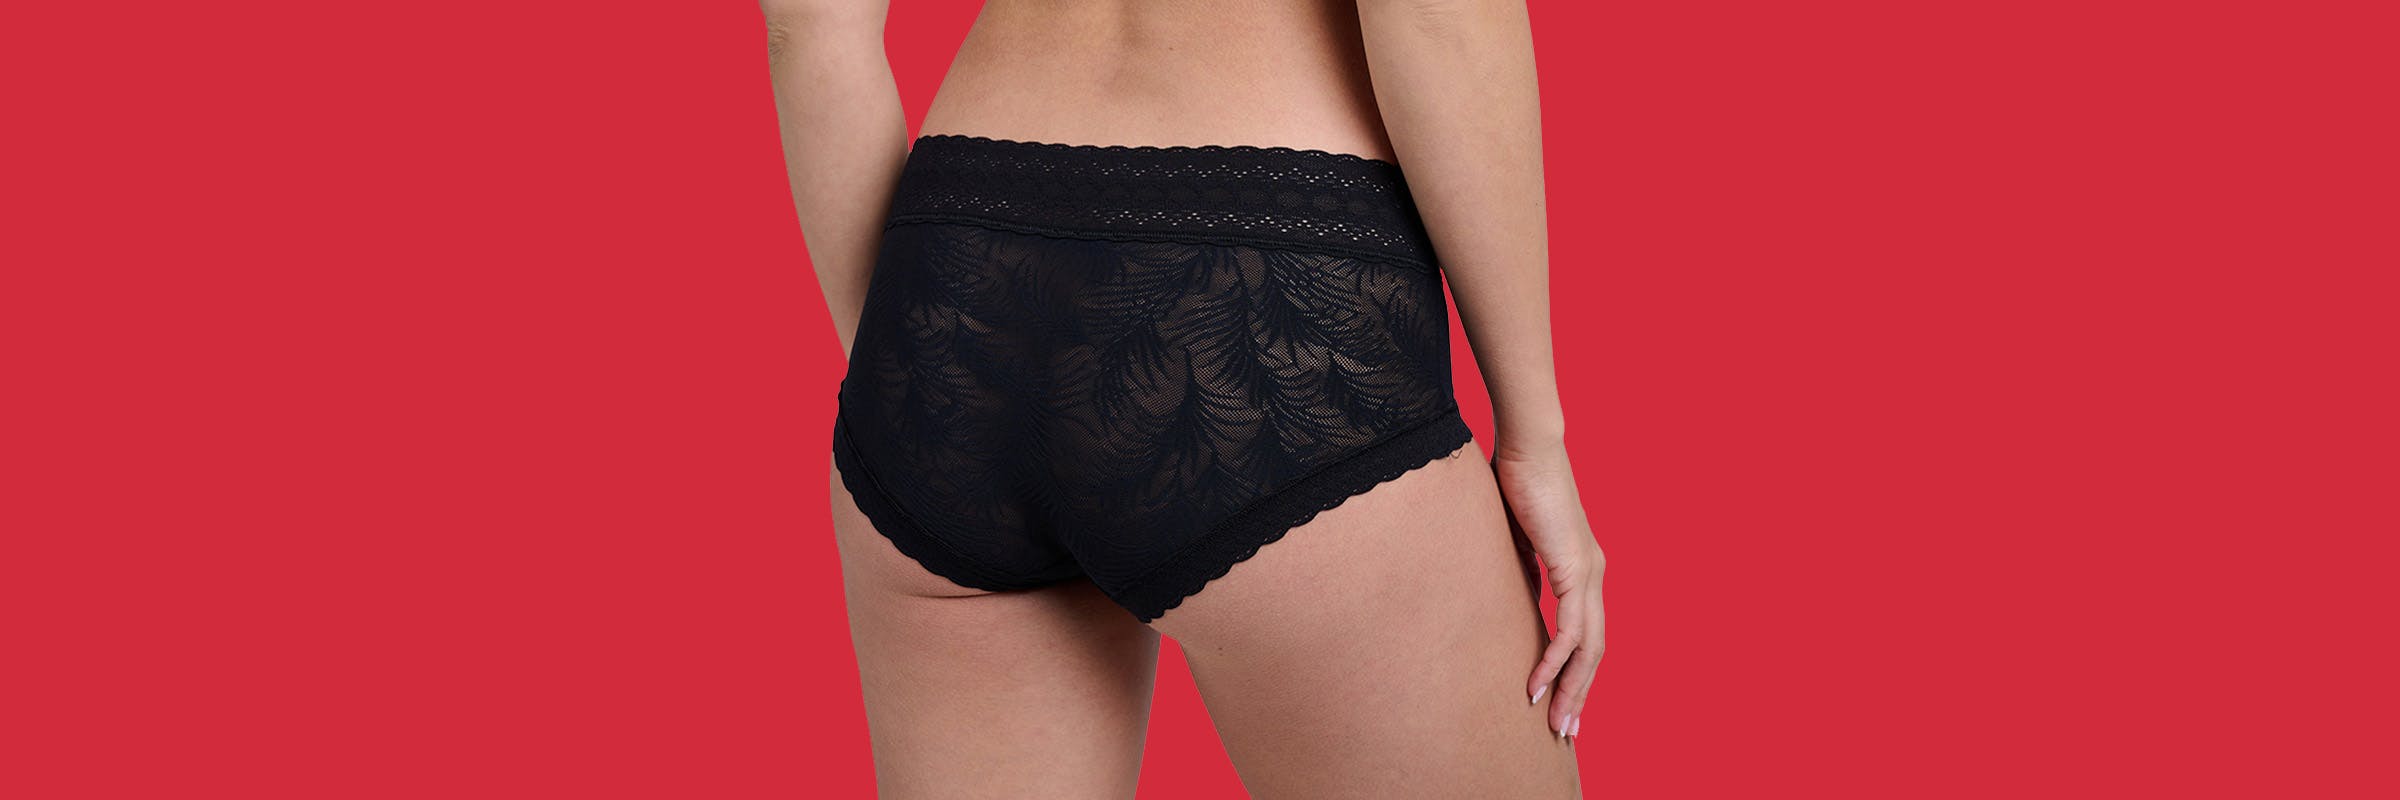 MeUndies on X: Sometimes black underwear is just what you need